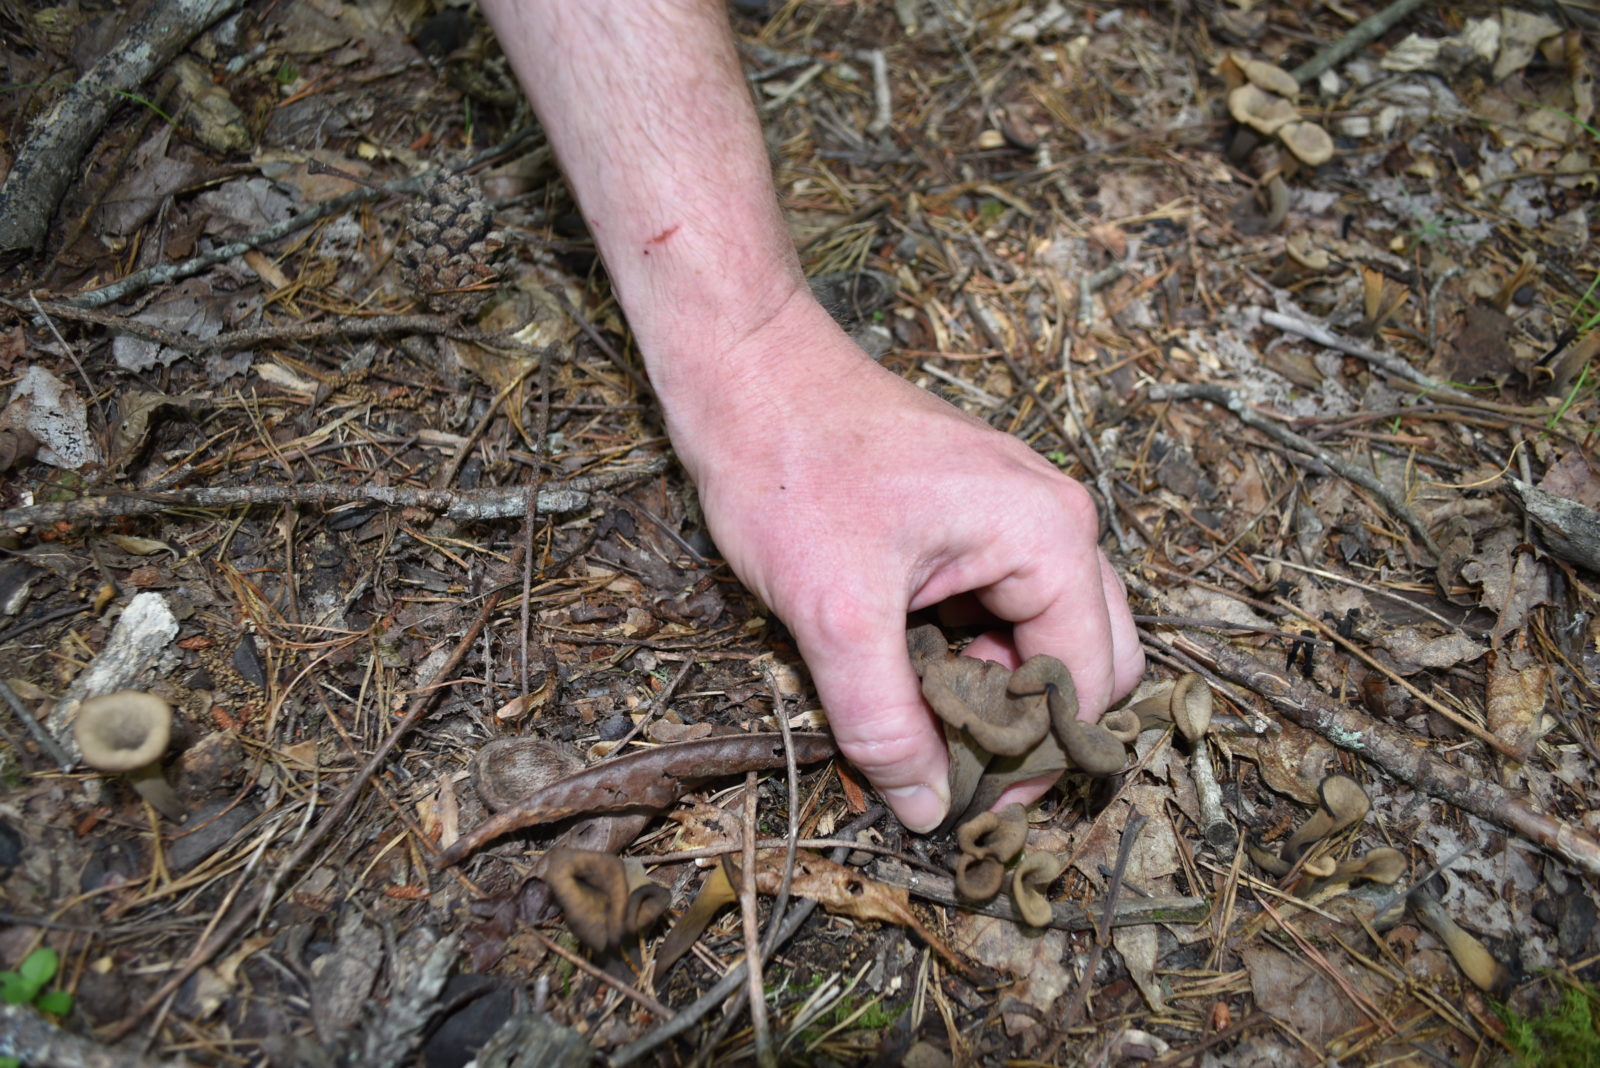 An image of a hand picking a Black Trumpet Chanterelle from the forest floor